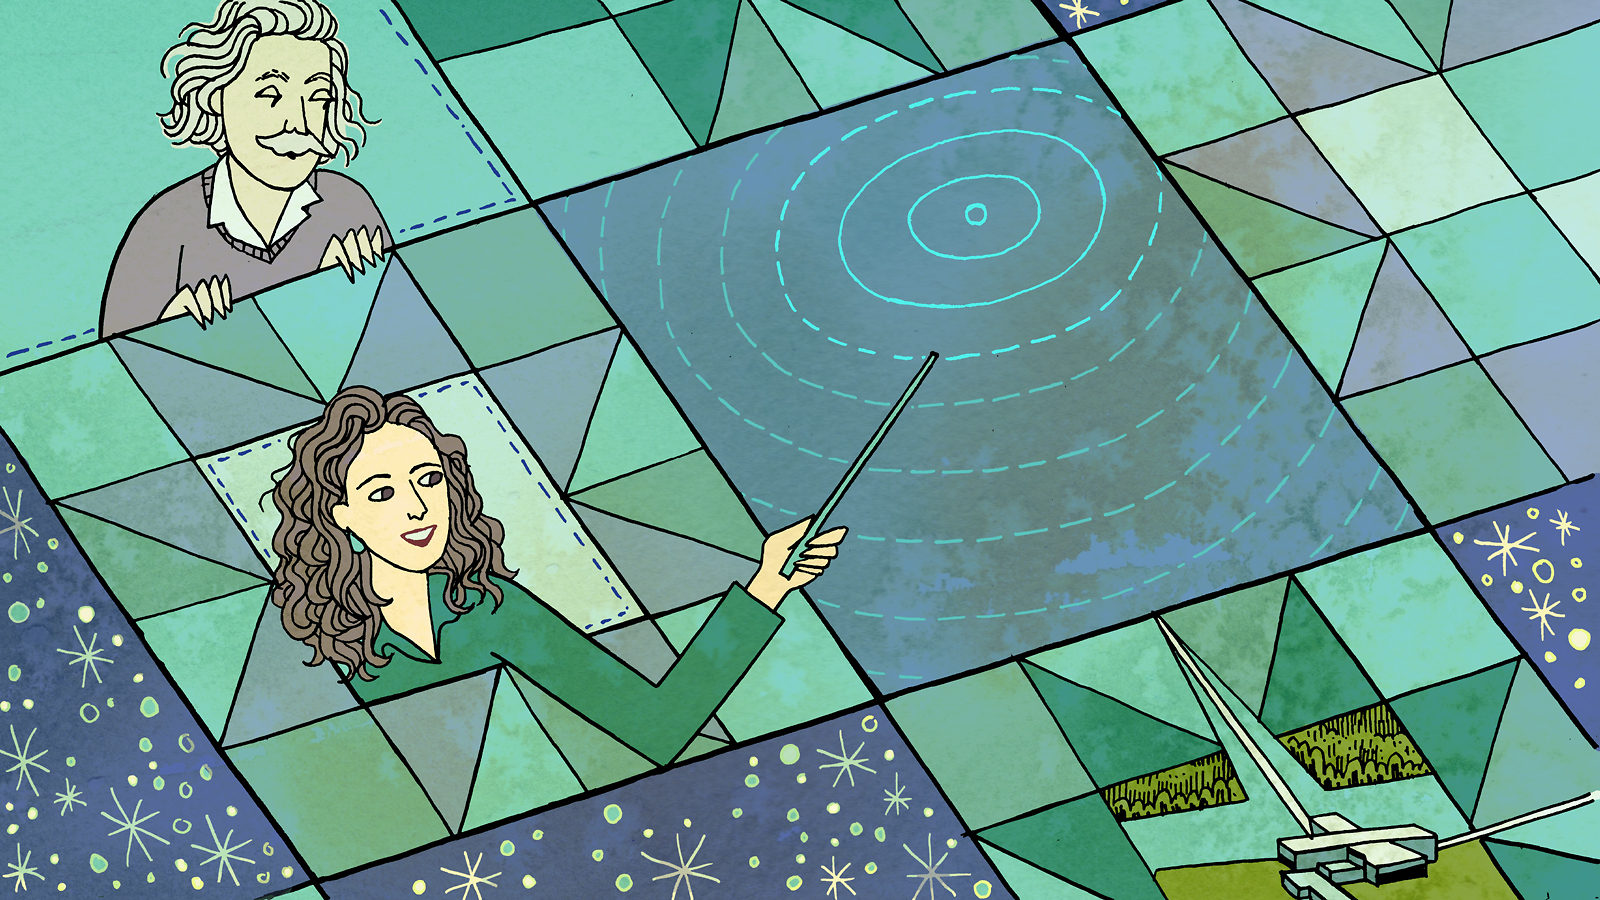 Einstein and woman in game board, she is holding a want and pointing it at concentric circles in space